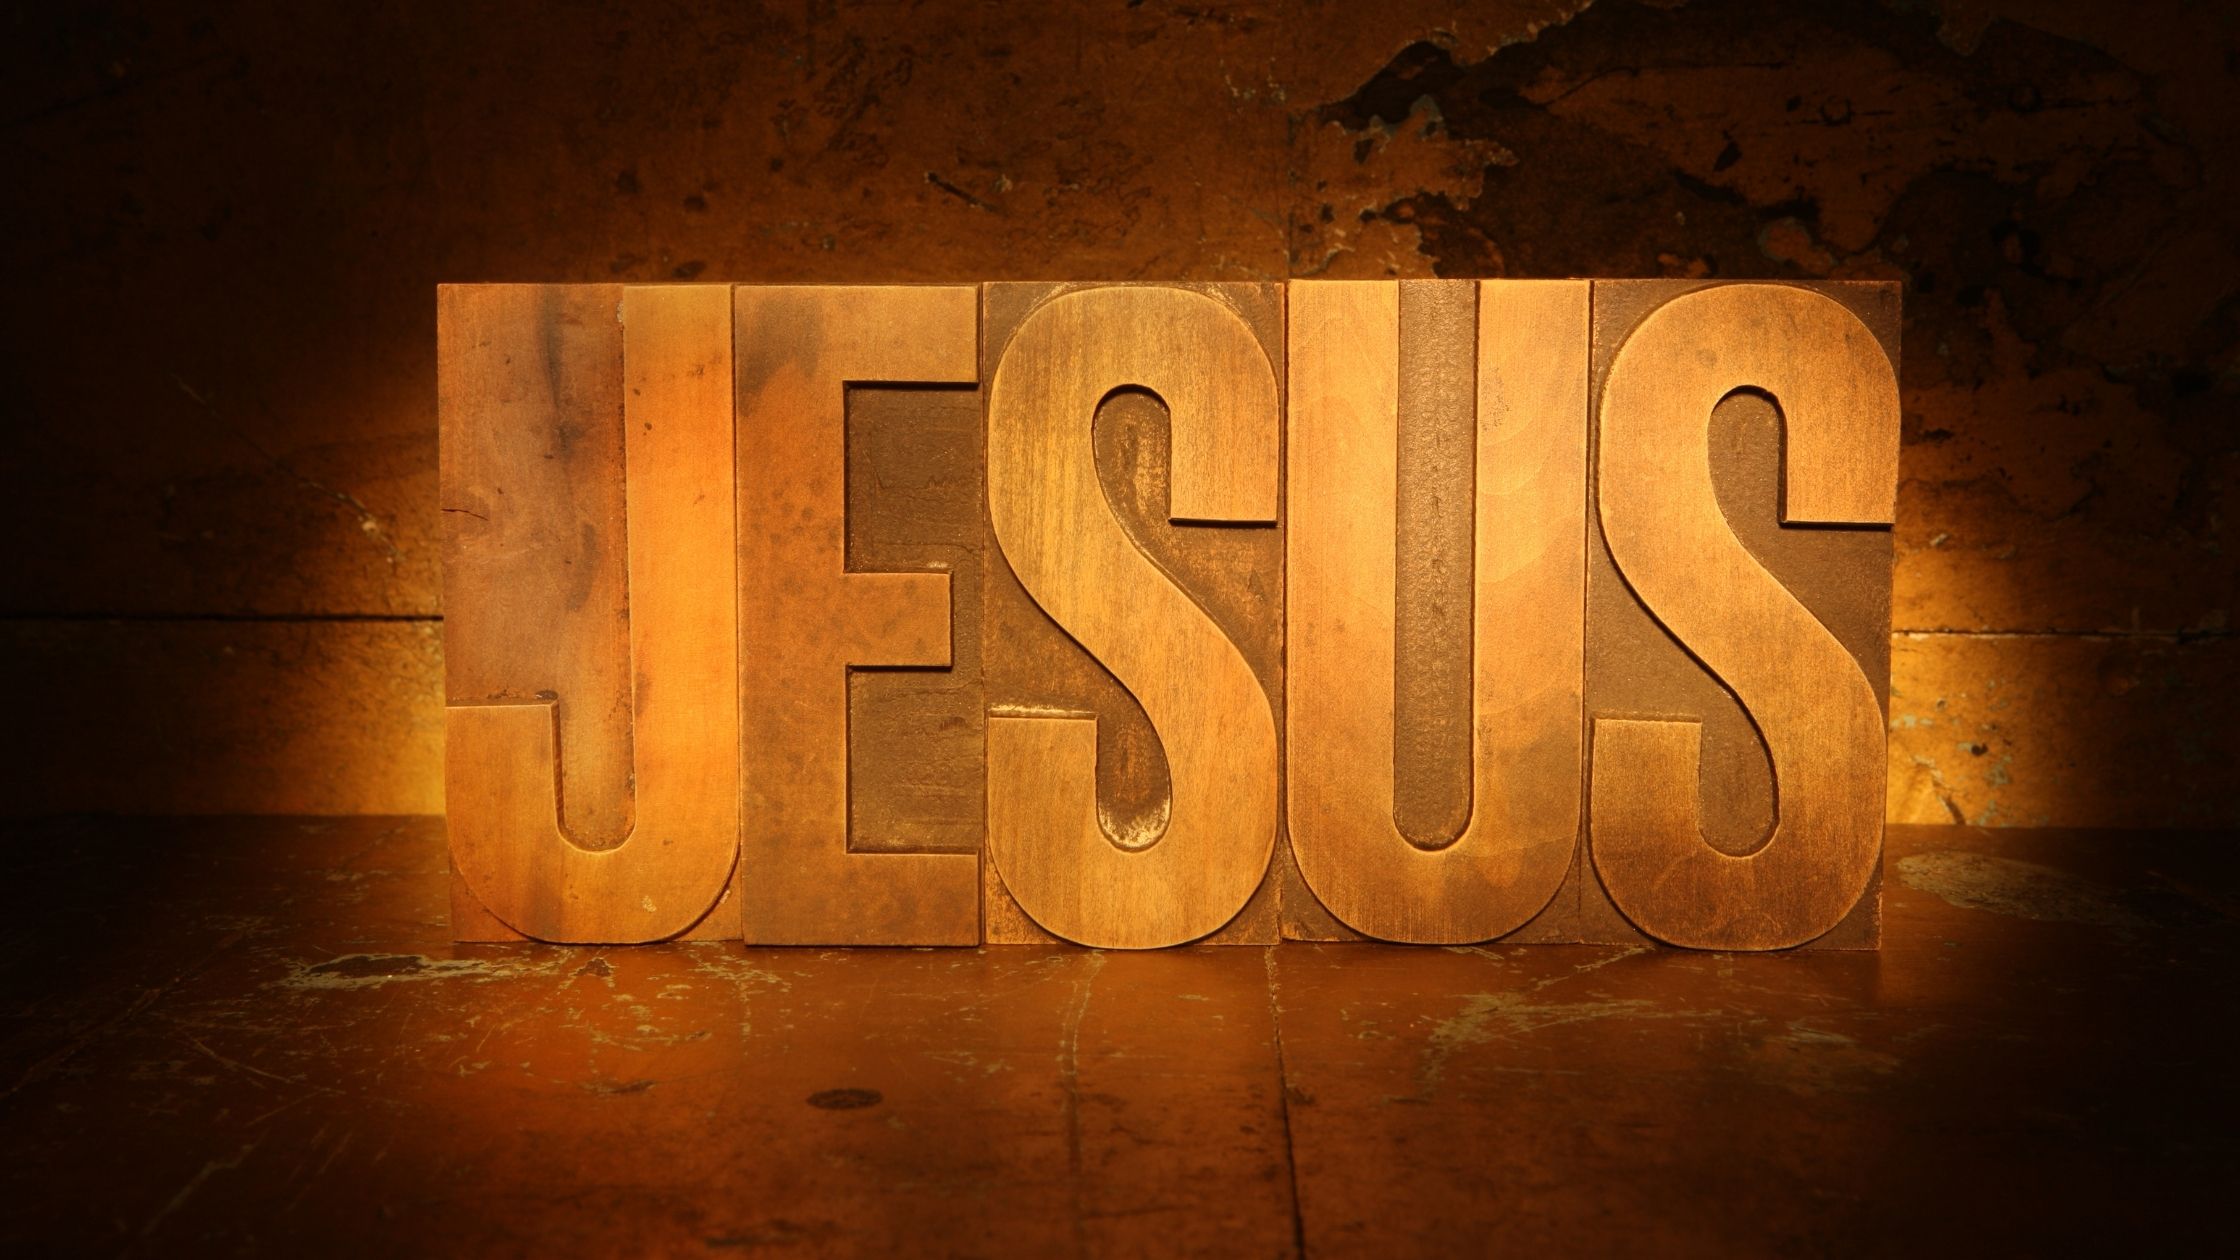 Jesus The Name Above All Names